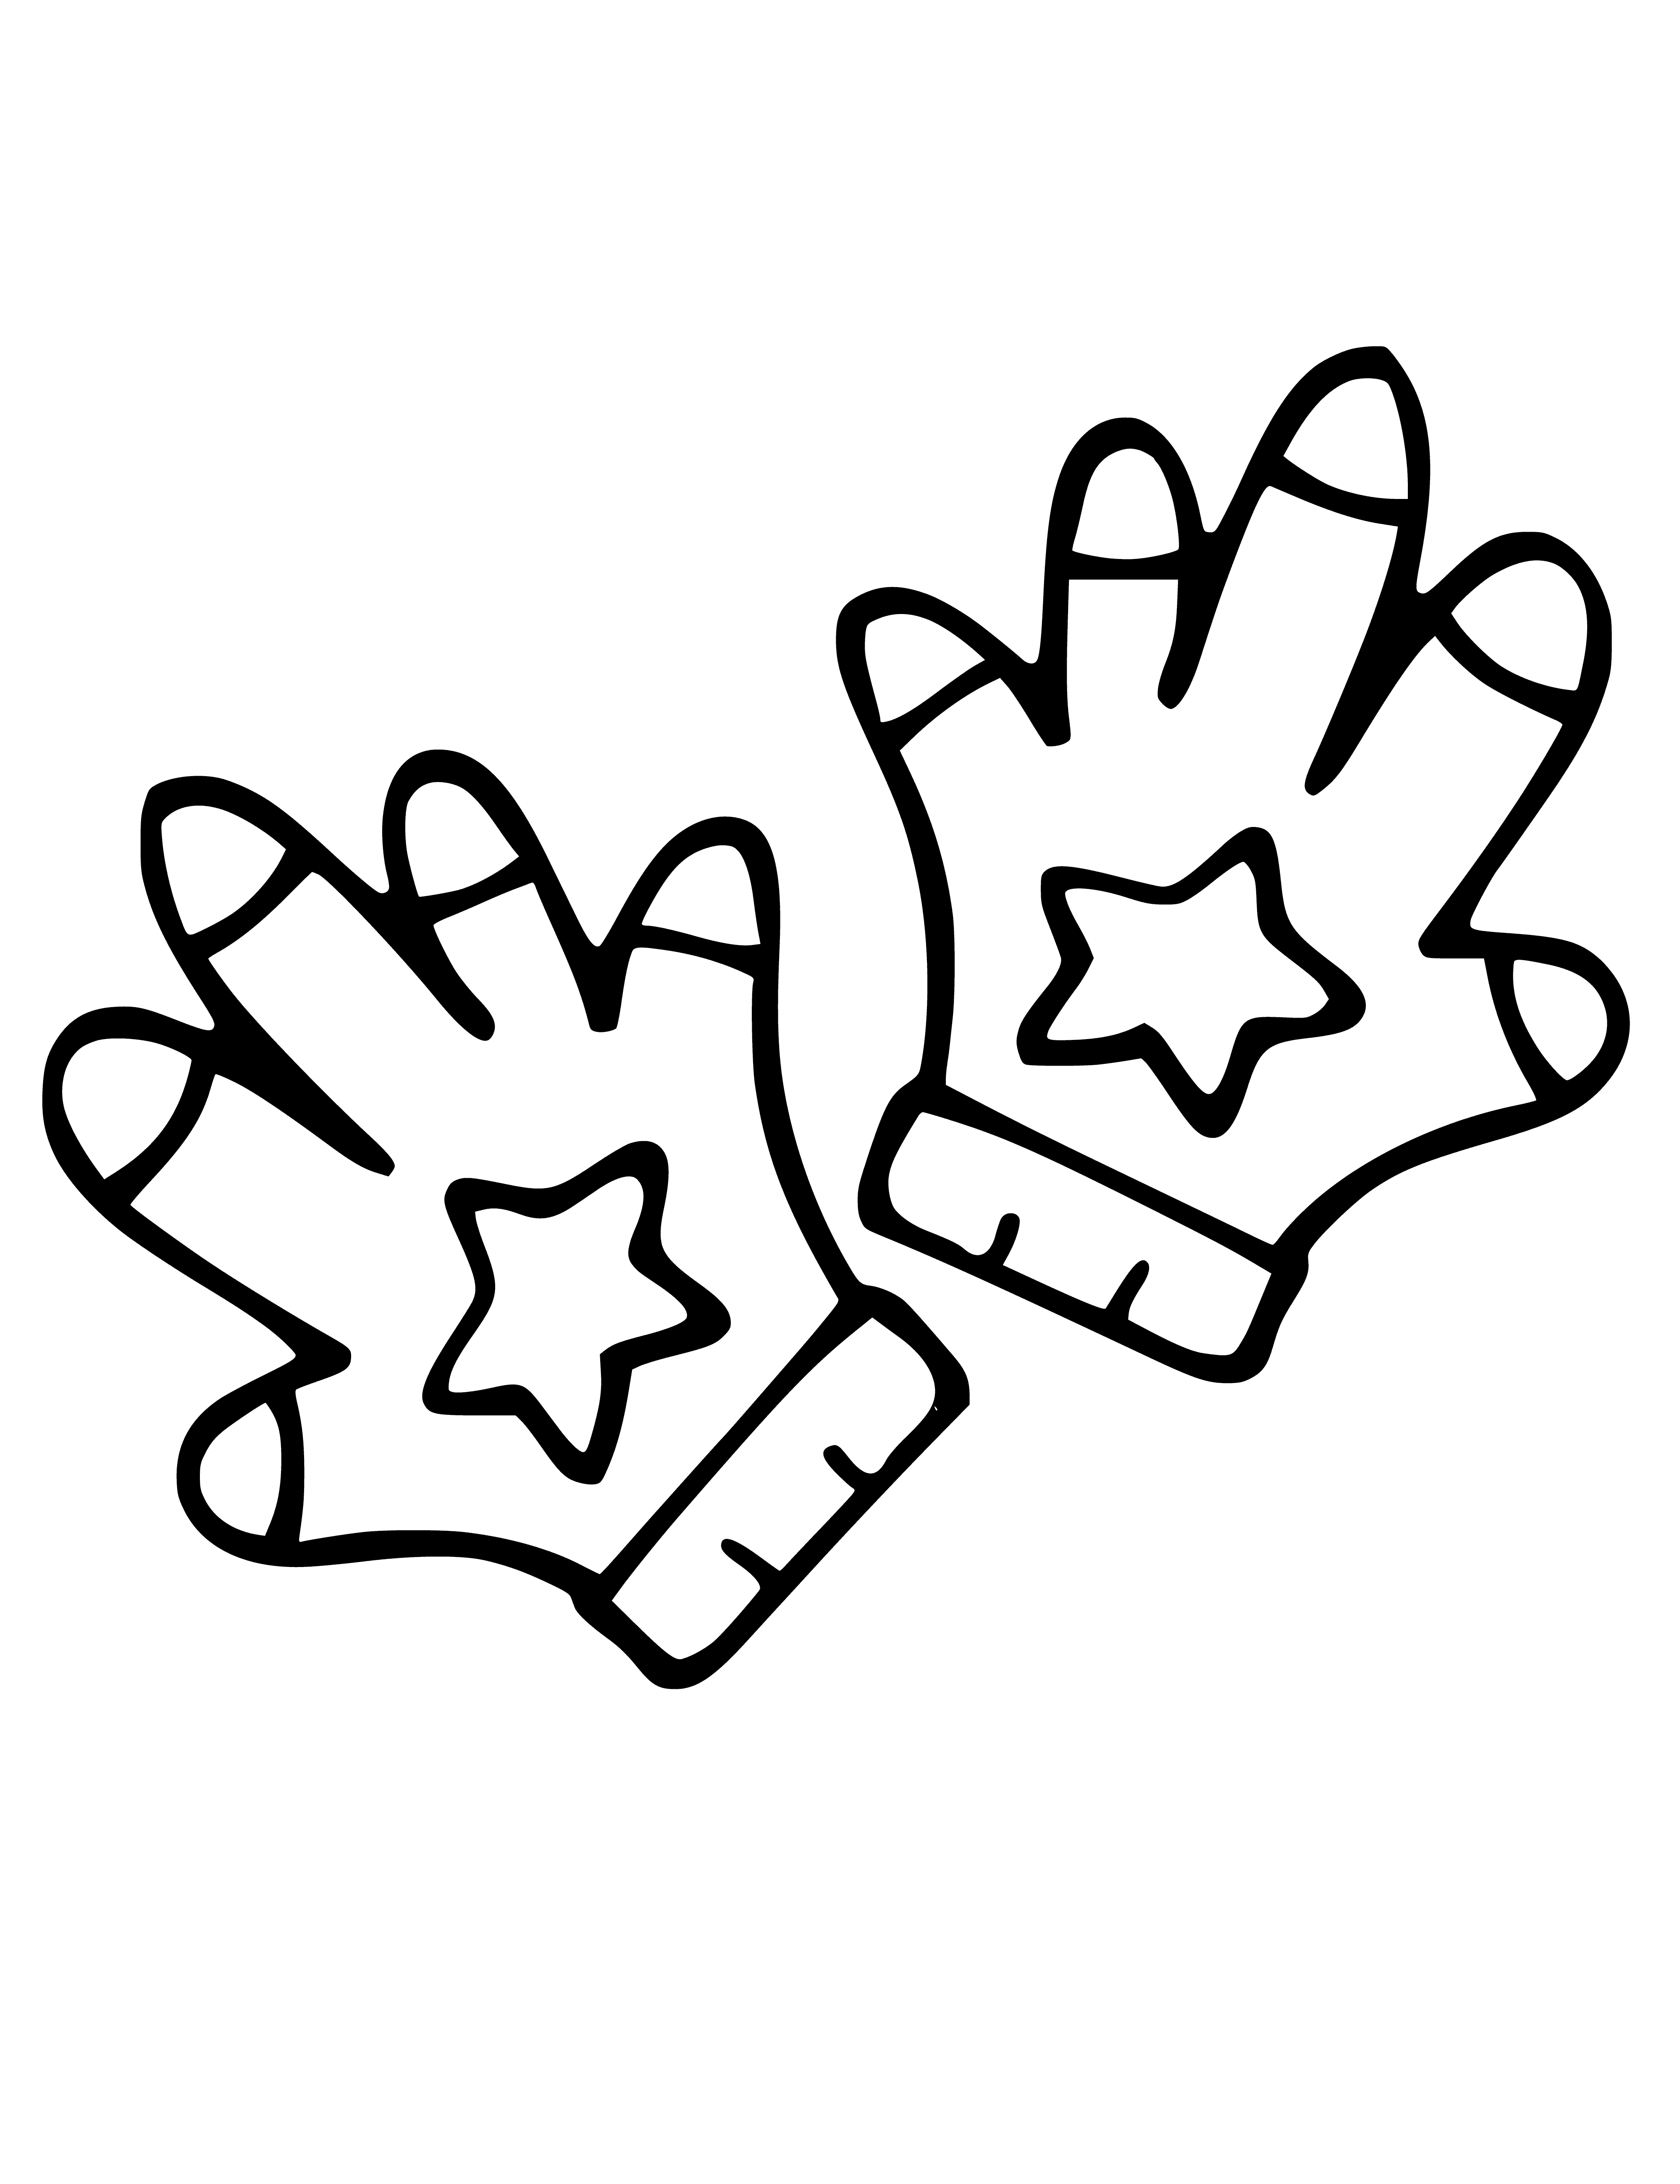 coloring page: 2 coloring pages of green & pink gloves w/ hearts for 3-yr-olds. Fun way to teach colors & shapes!